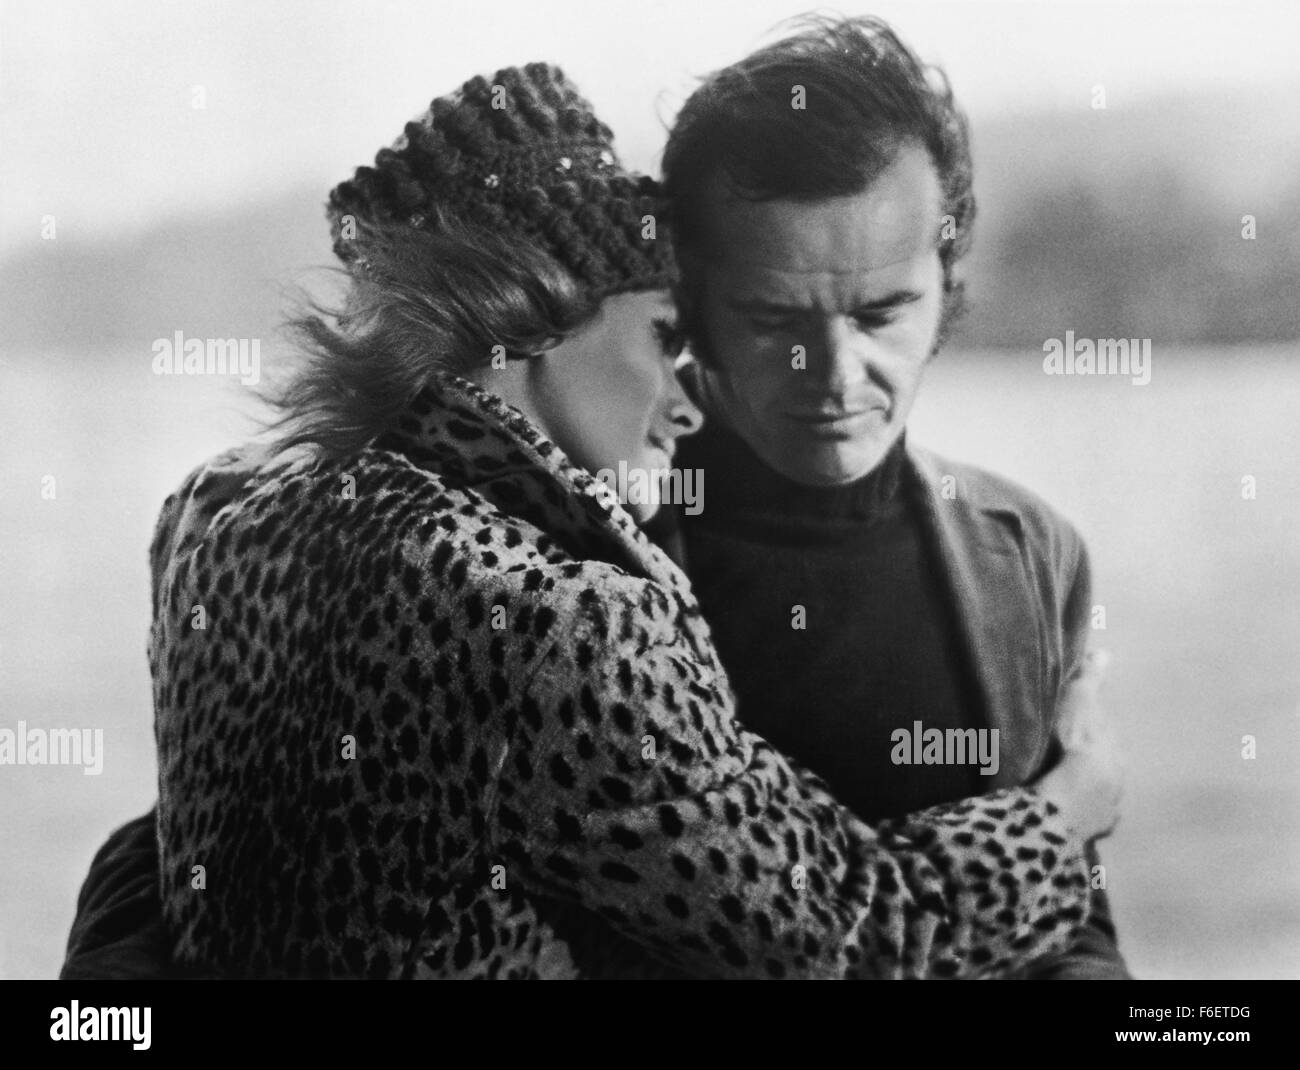 Sep 12, 1970; Vancouver, BC, CANADA; Actor JACK NICHOLSON stars as Robert Dupea and KAREN BLACK as Rayette Dipesto in the Bob Rafelson directed drama, 'Five Easy Pieces.' Stock Photo